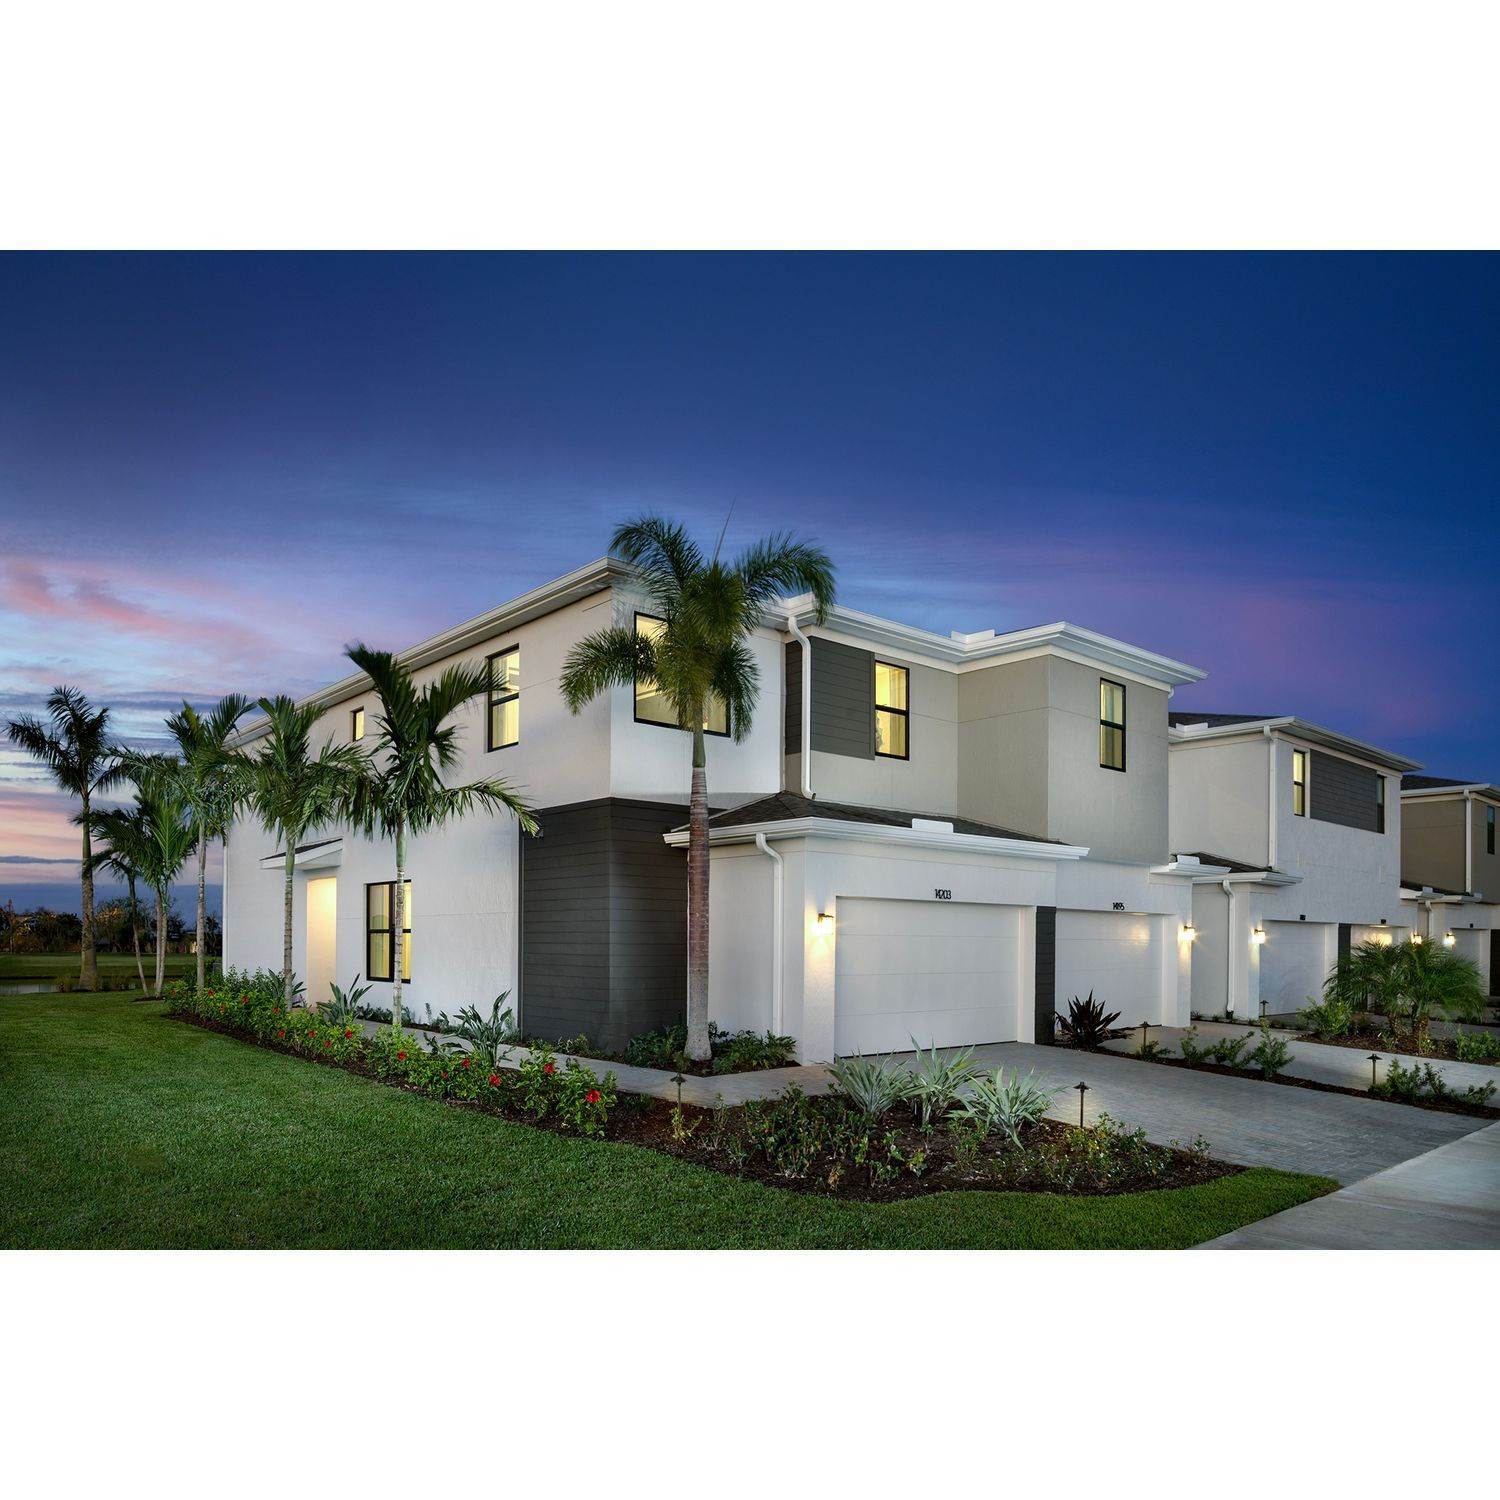 12. Tradition - Cadence - Townhomes building at 10455 SW Orana Drive, Port St. Lucie, FL 34987